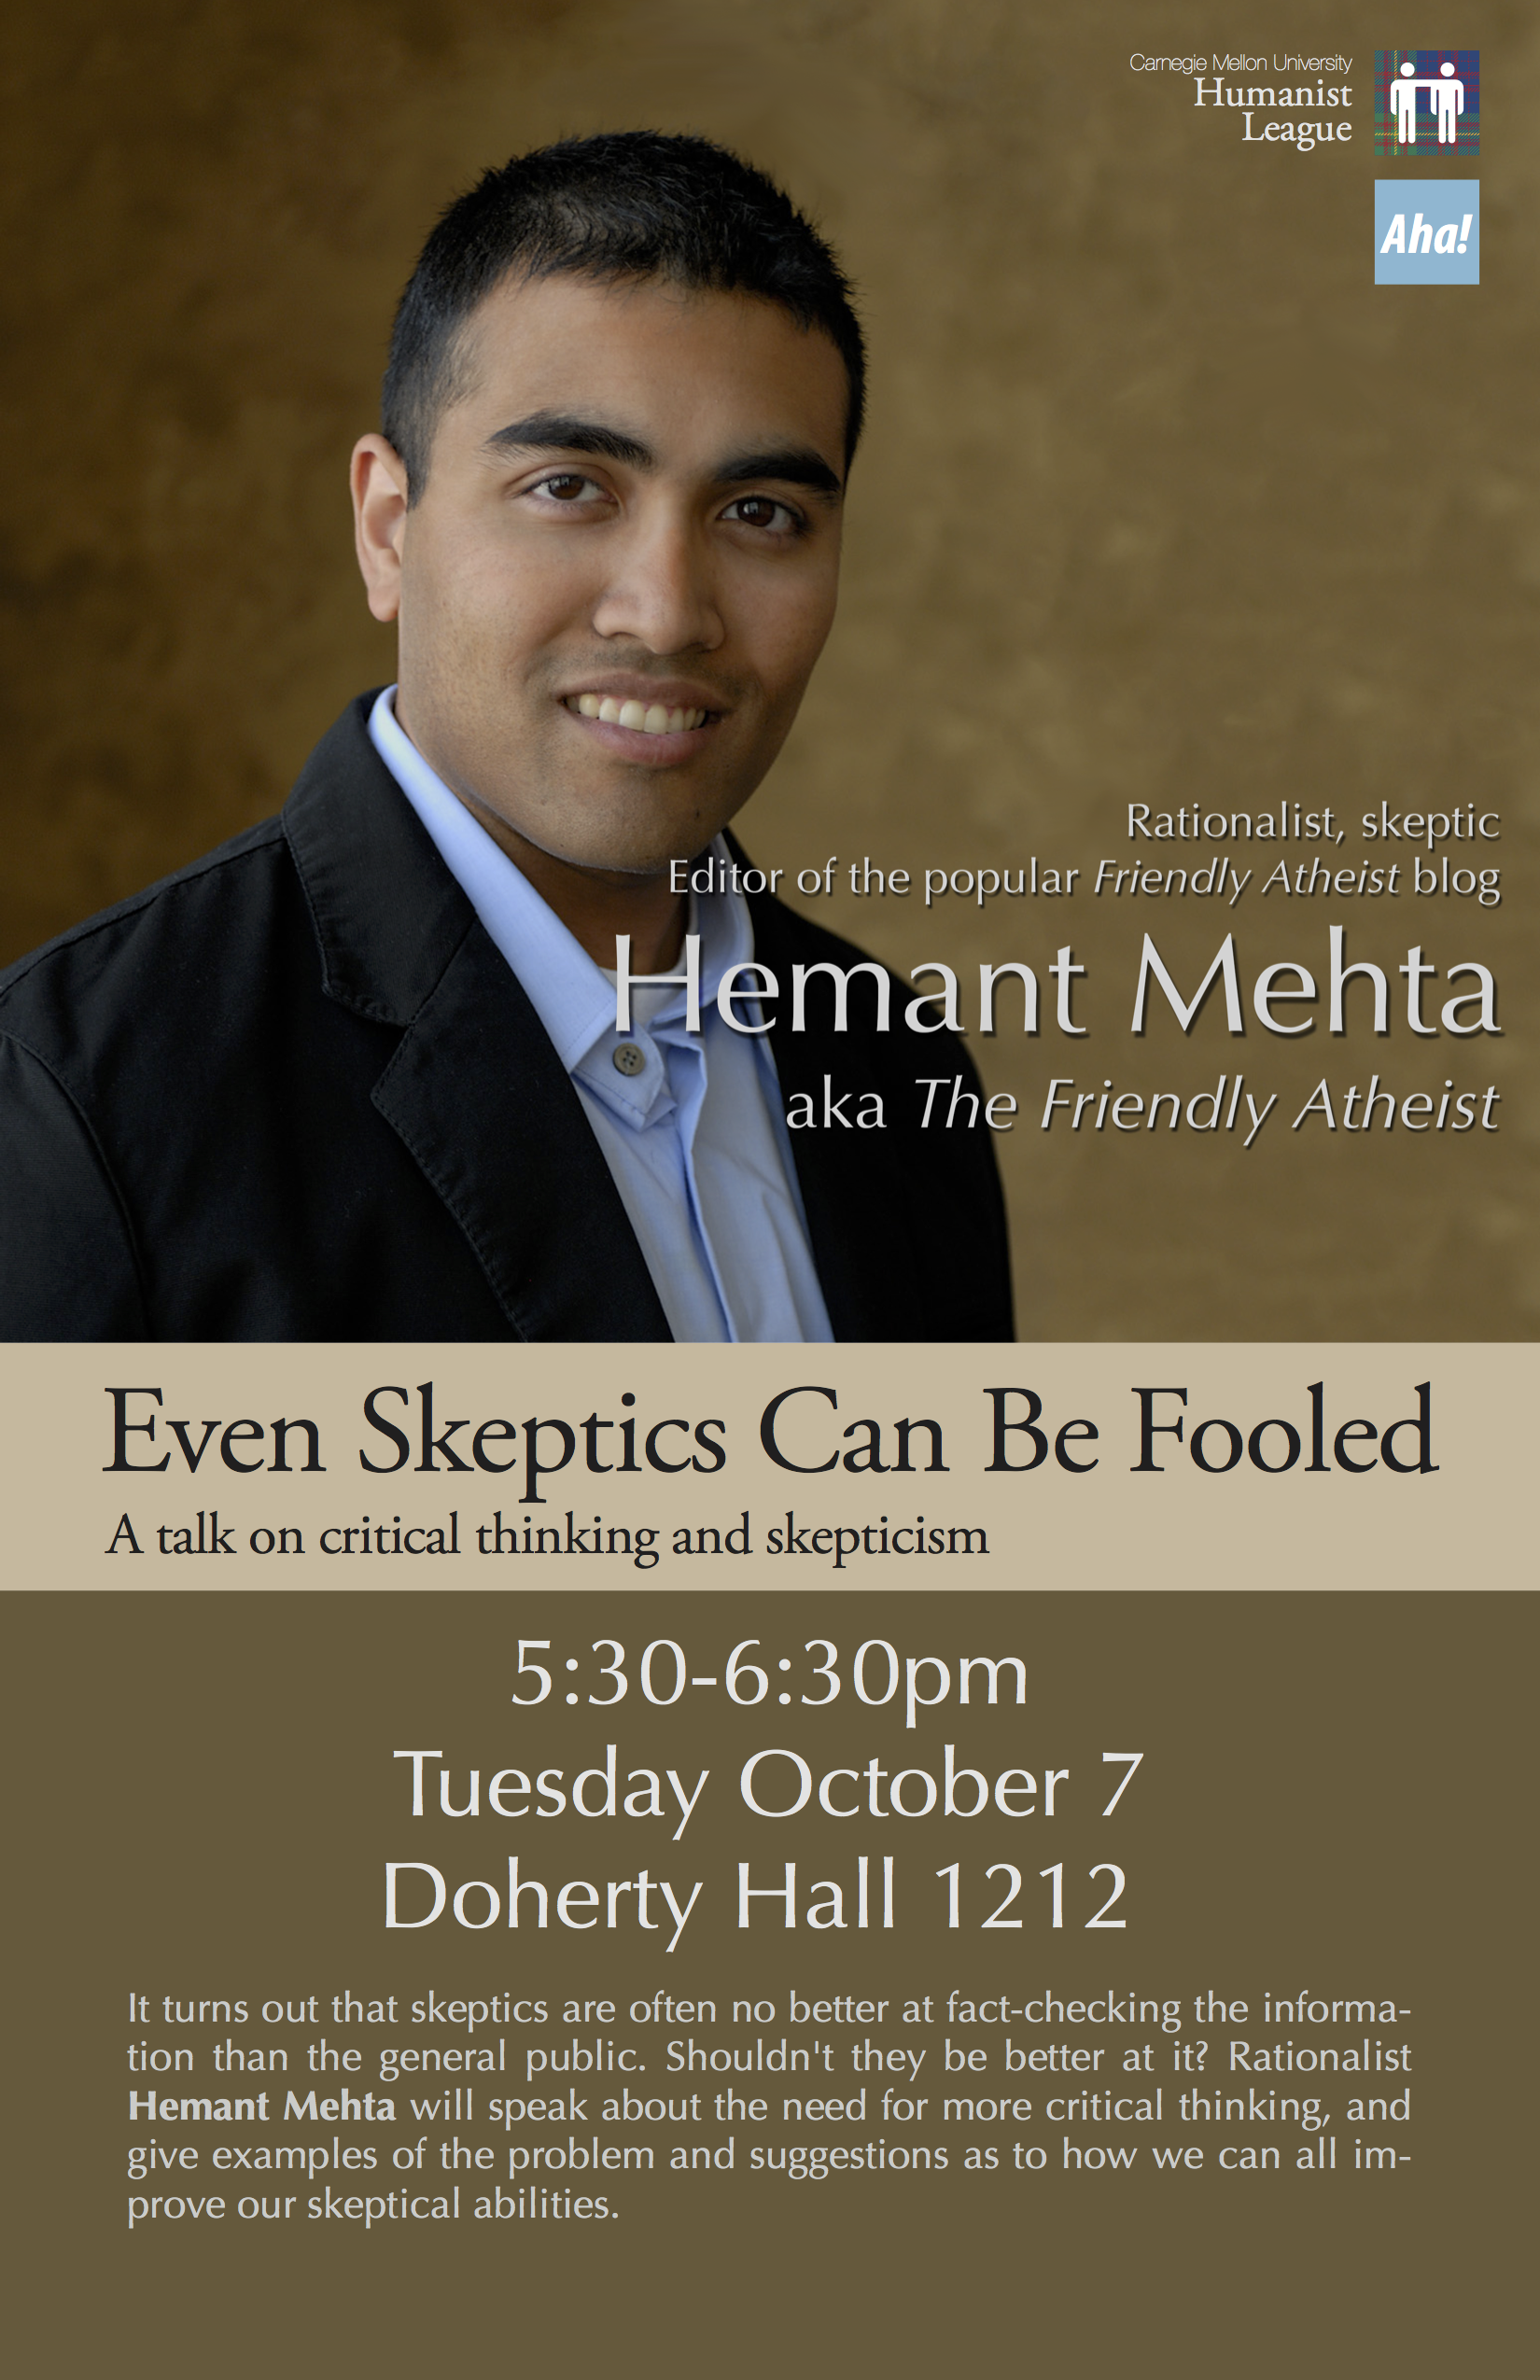 Hemant Mehta – Even Skeptics Can Be Fooled Poster